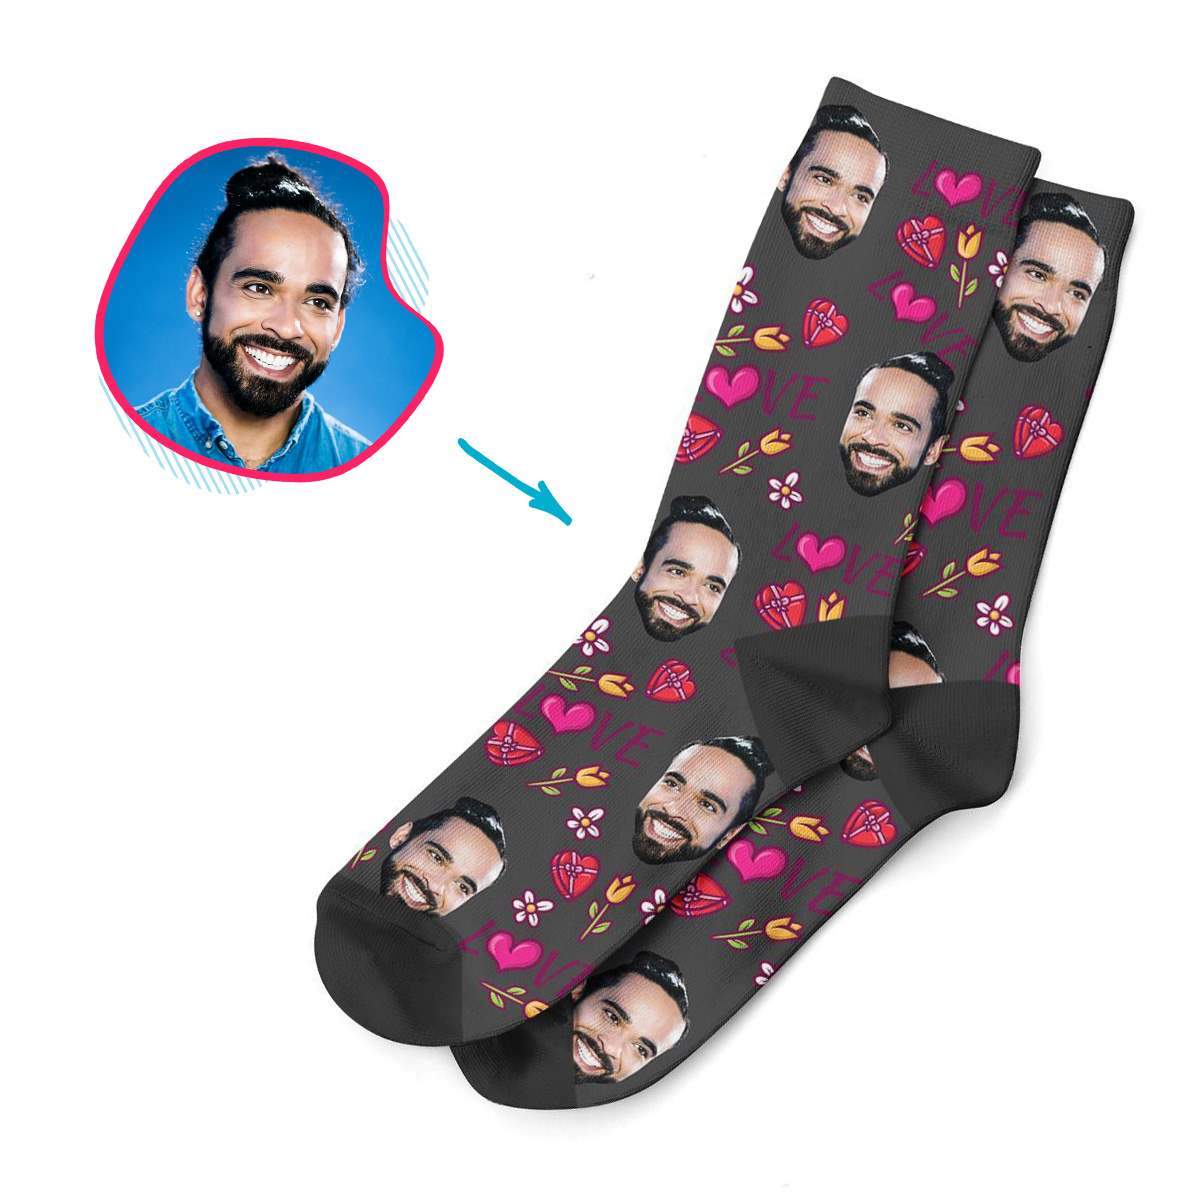 dark Hearts and Flowers socks personalized with photo of face printed on them